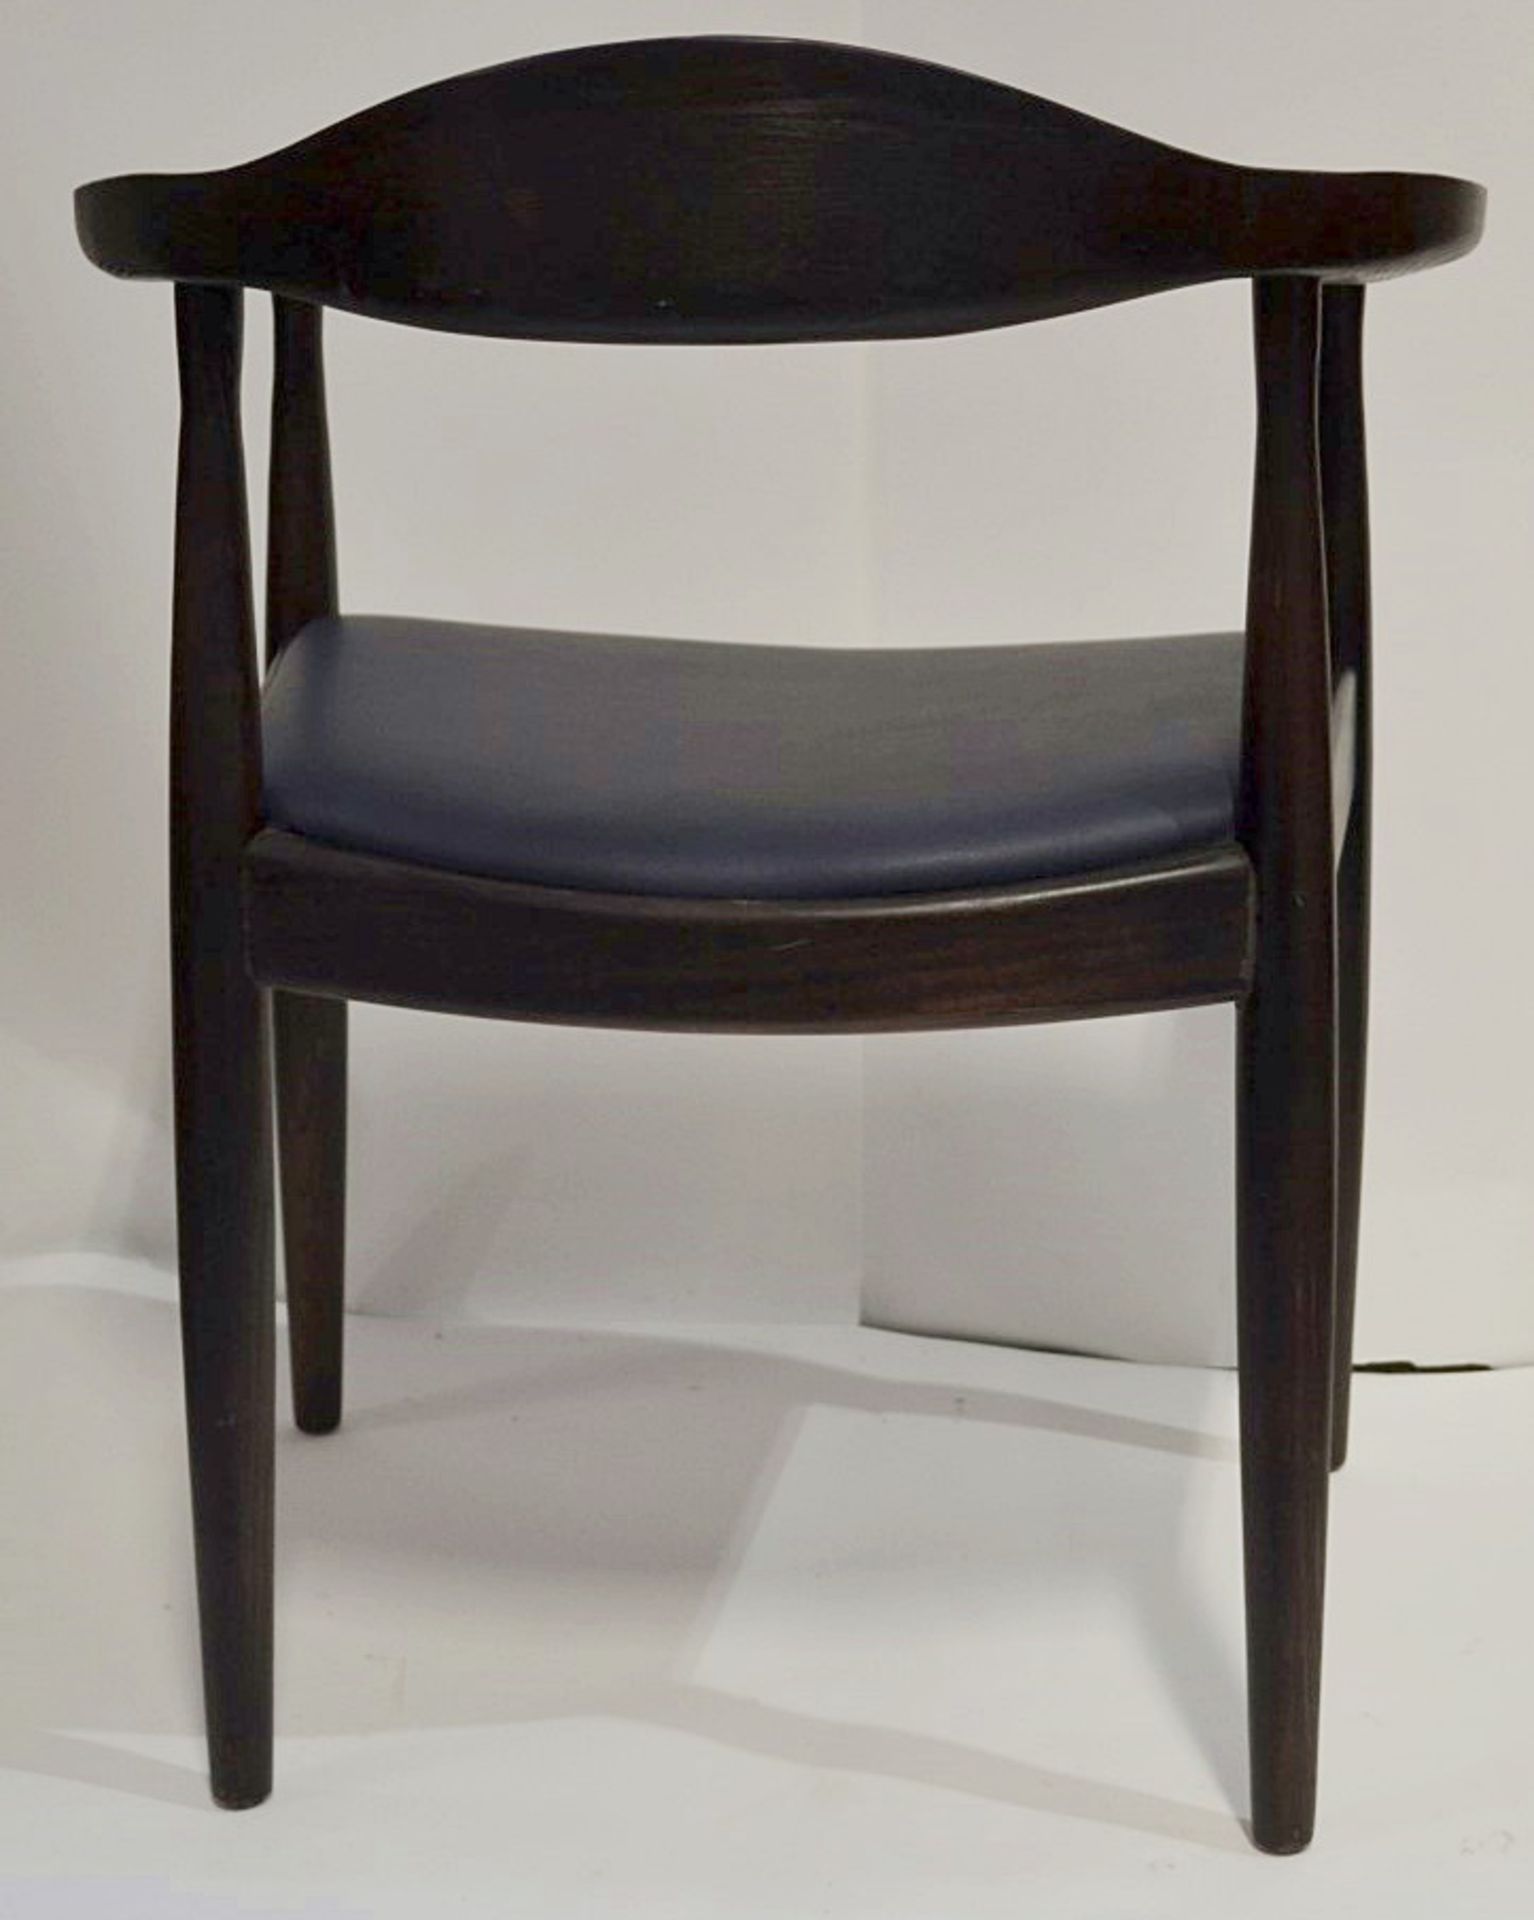 4 x Wooden Dining Chairs With Upholstered Seats - Dimensions: H78 x W64 x D57cm, Seat Height: 47cm - - Image 3 of 4